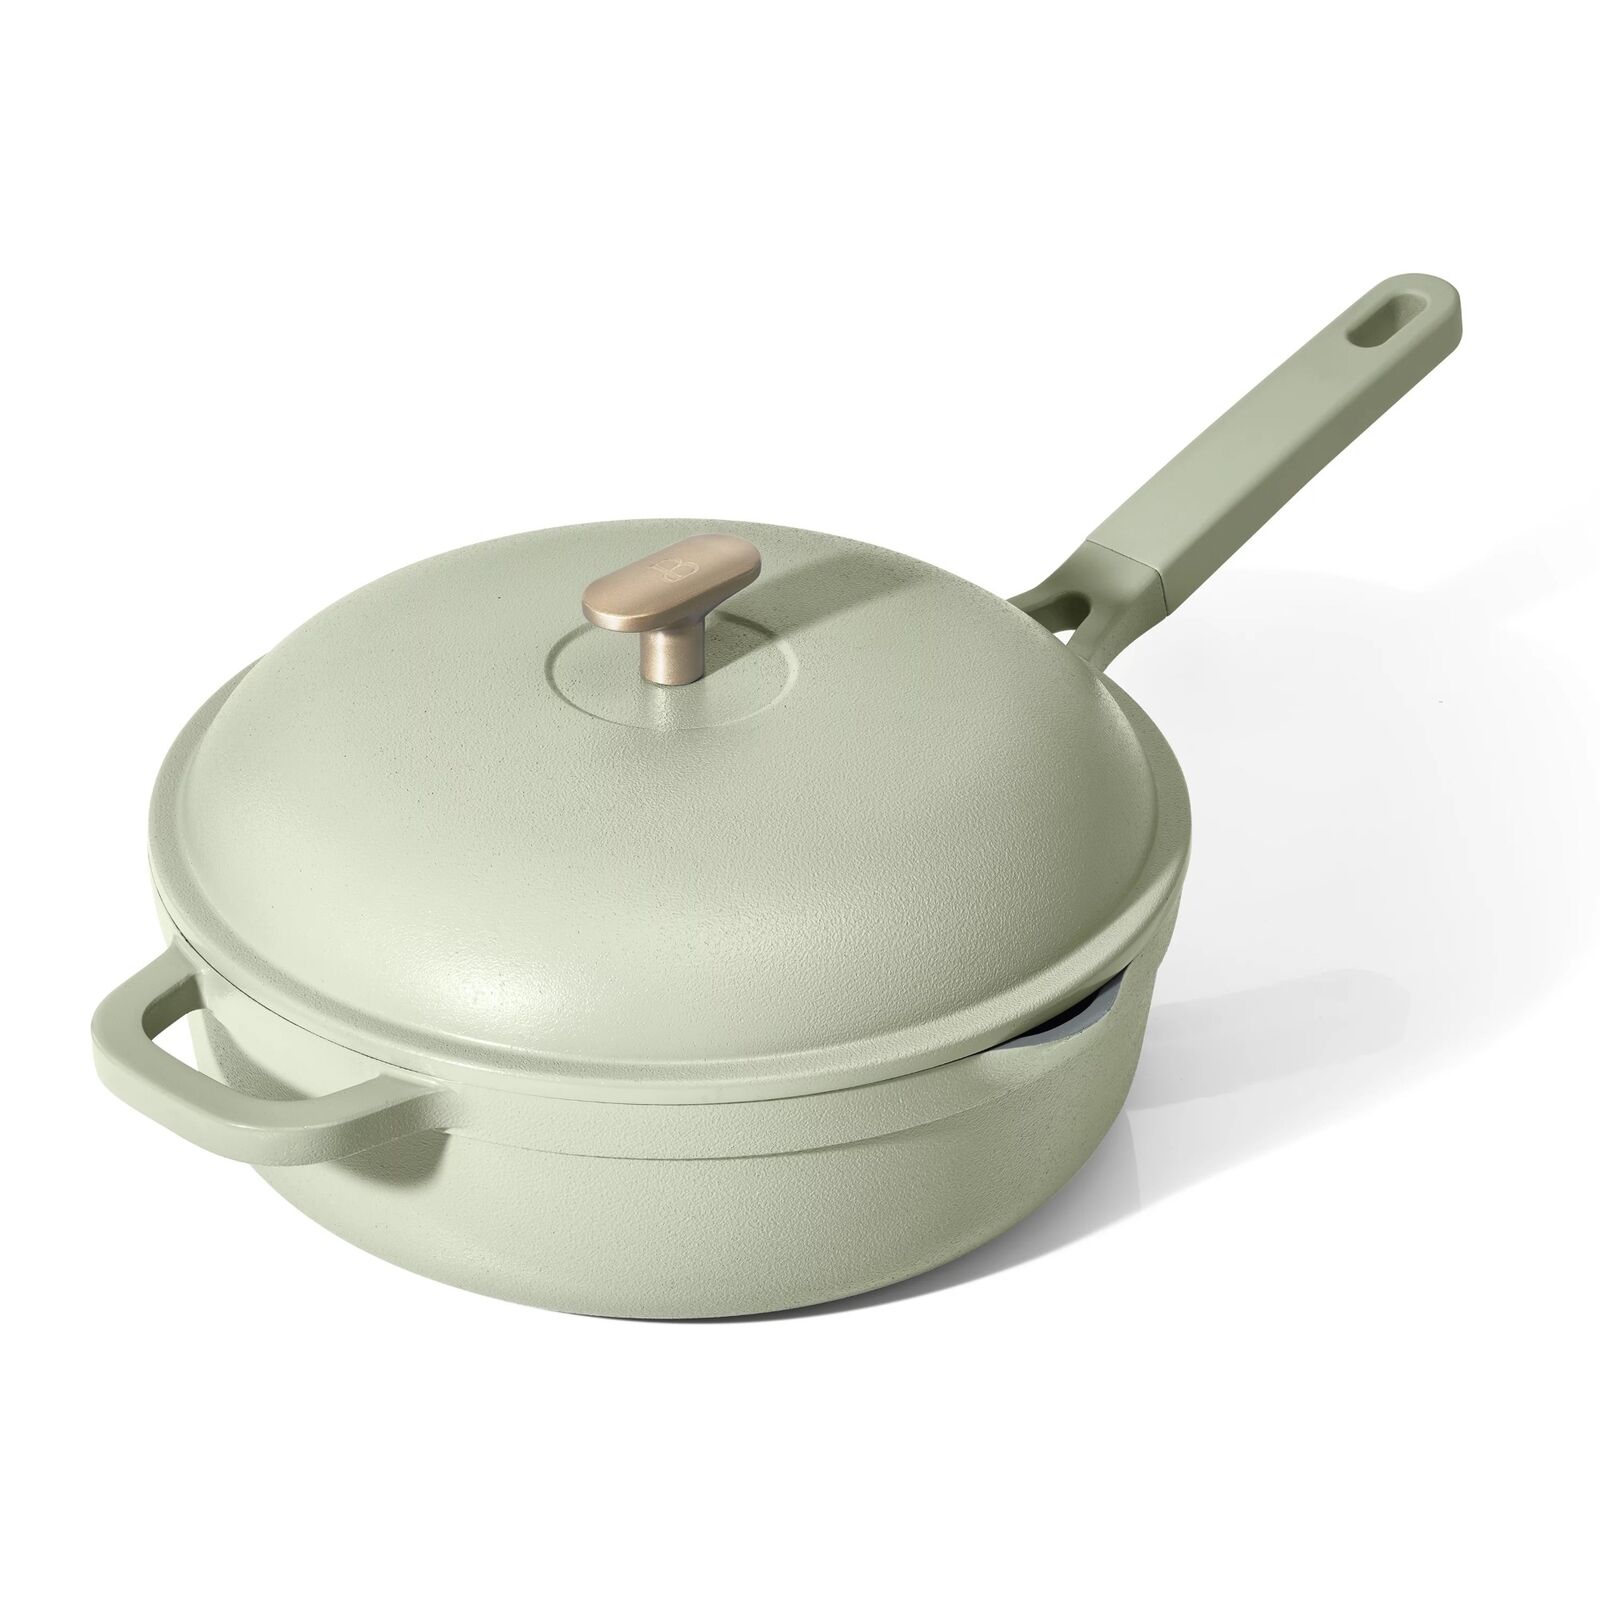  Multifunctional 4 QT Hero Pan with Steam Liner Set of 3 Sage Green 